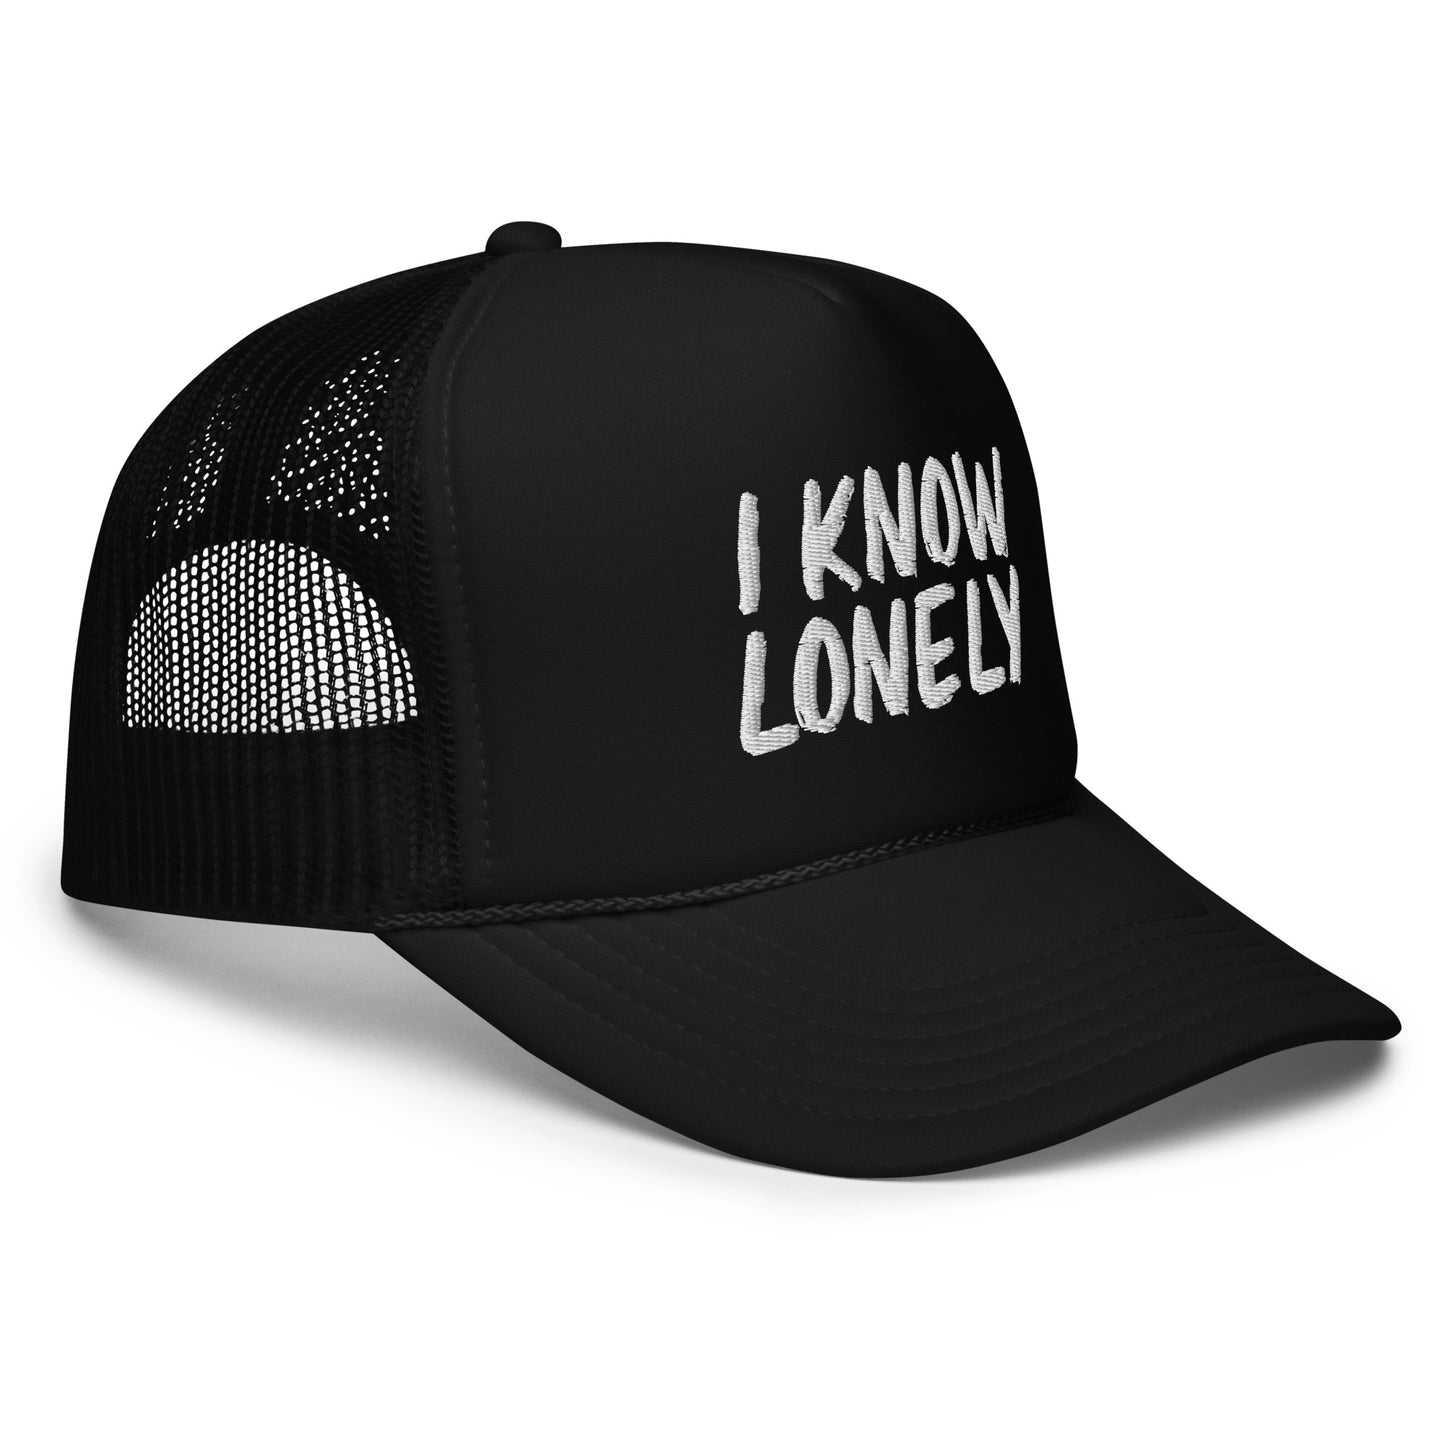 I Know Lonely: Trucker Hat - Only7Seconds Shop